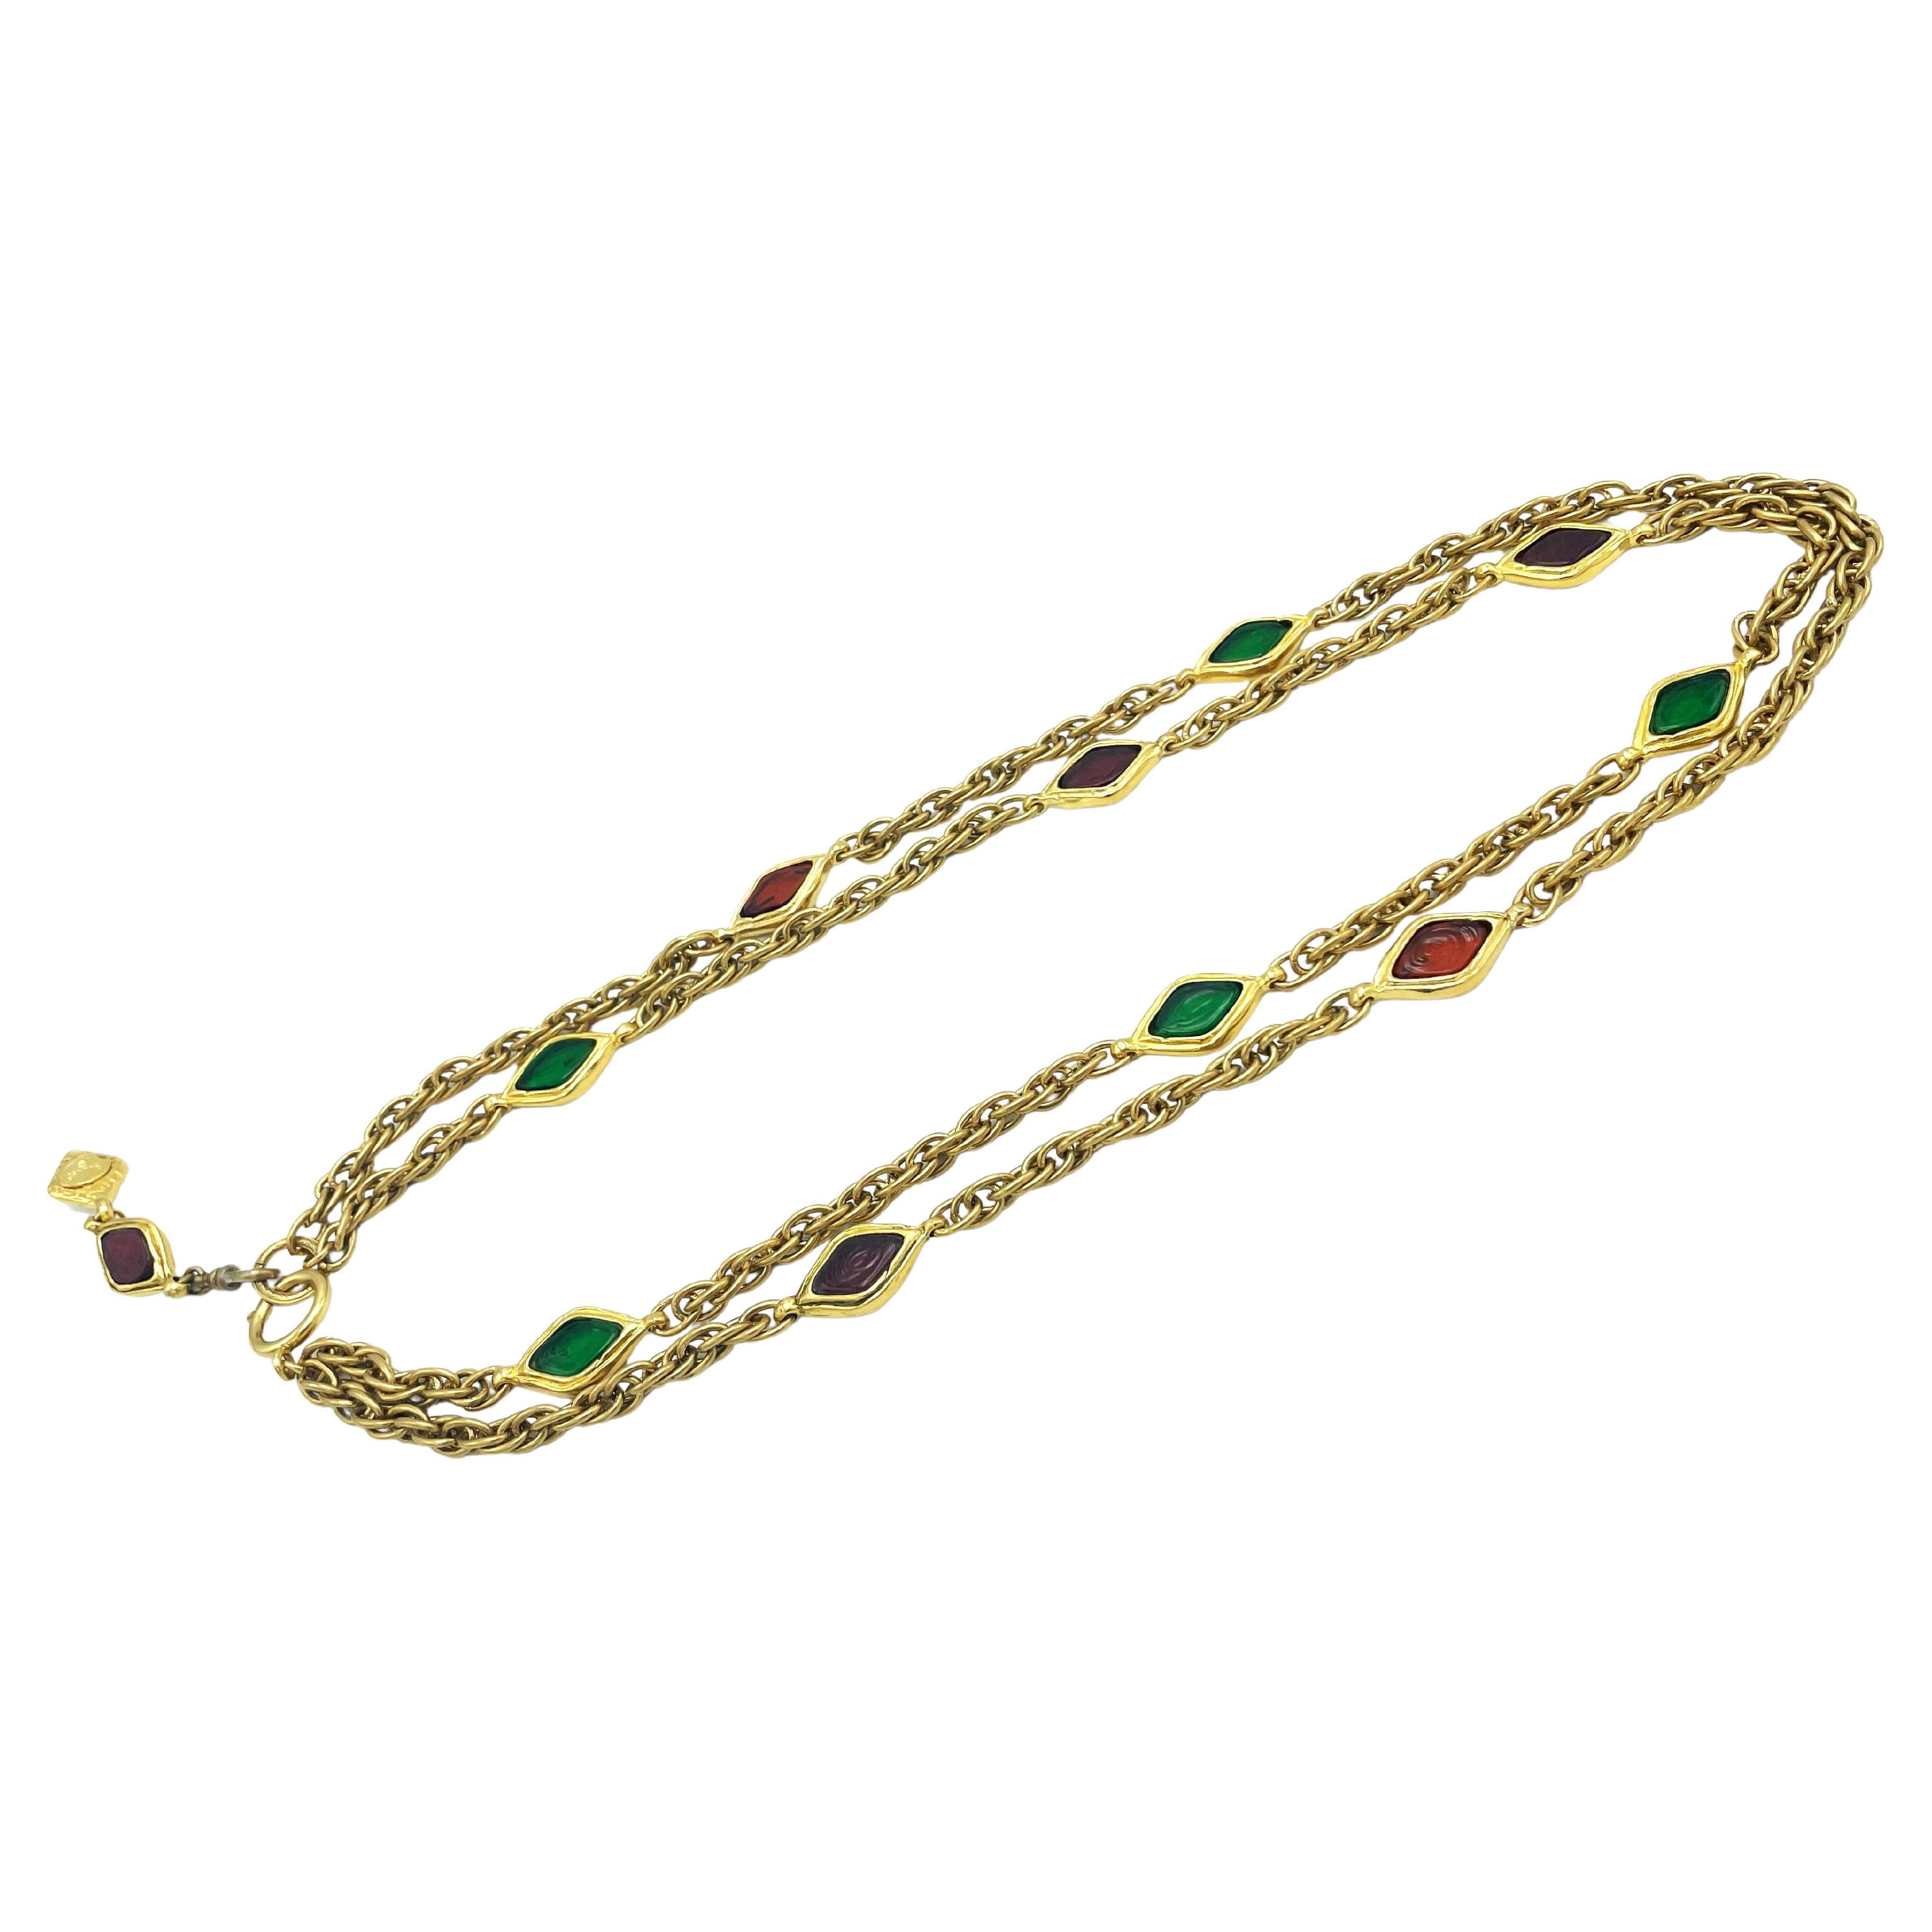 
 Chanel Gripoix necklace by K. Lagerfeld (Made in France) 2 row gold-plated chain with 11 red and green pate de verre. Signed on the quilted tag on the clasp . Late 1970's early 1980 
Aditional Information:
Dimension:  Length from the watch clasp